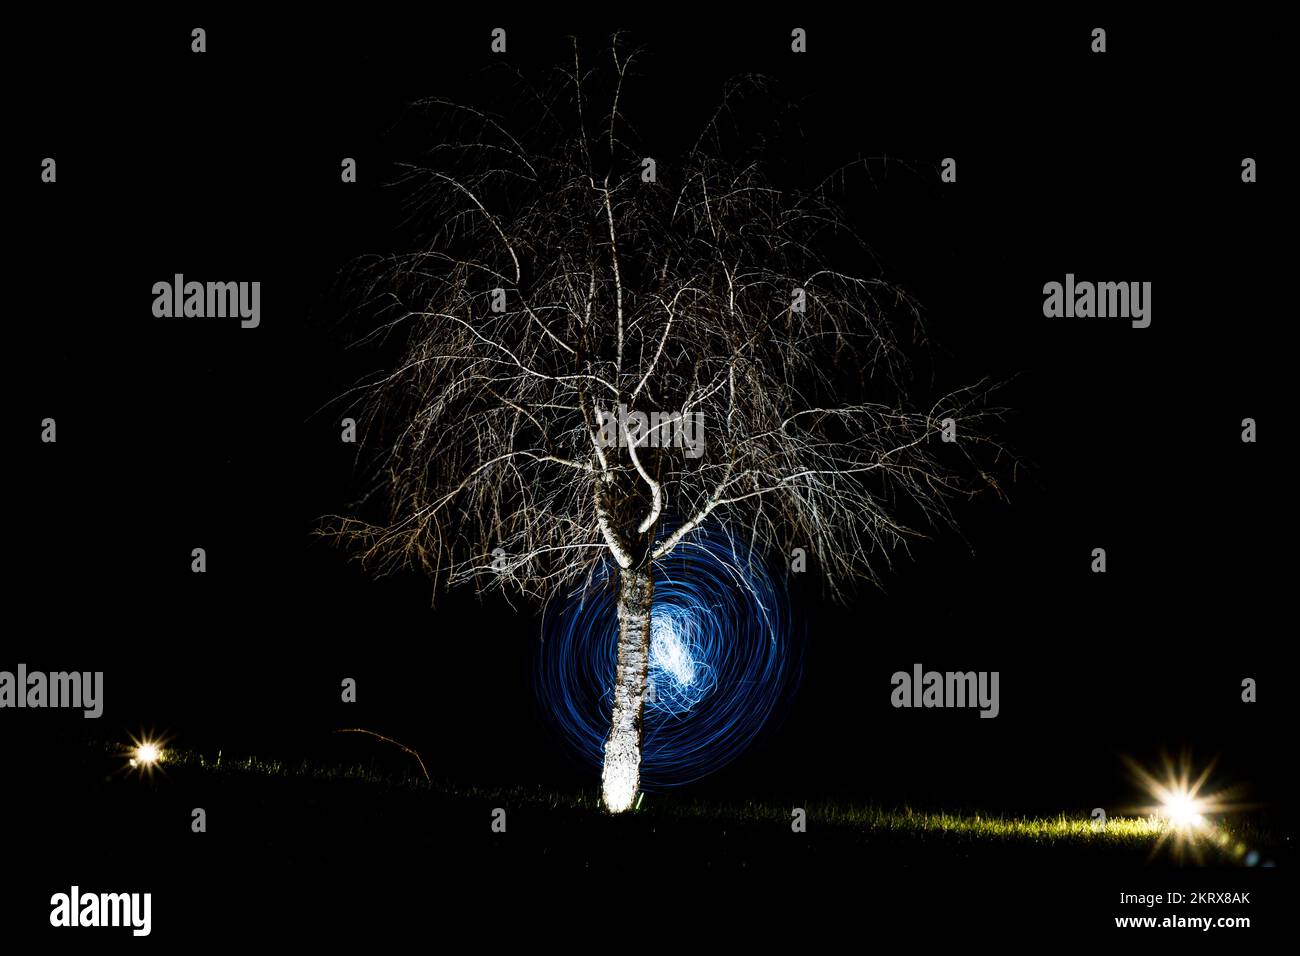 Night scene with artificial lighting on tree and spiraling light streaks in background Stock Photo